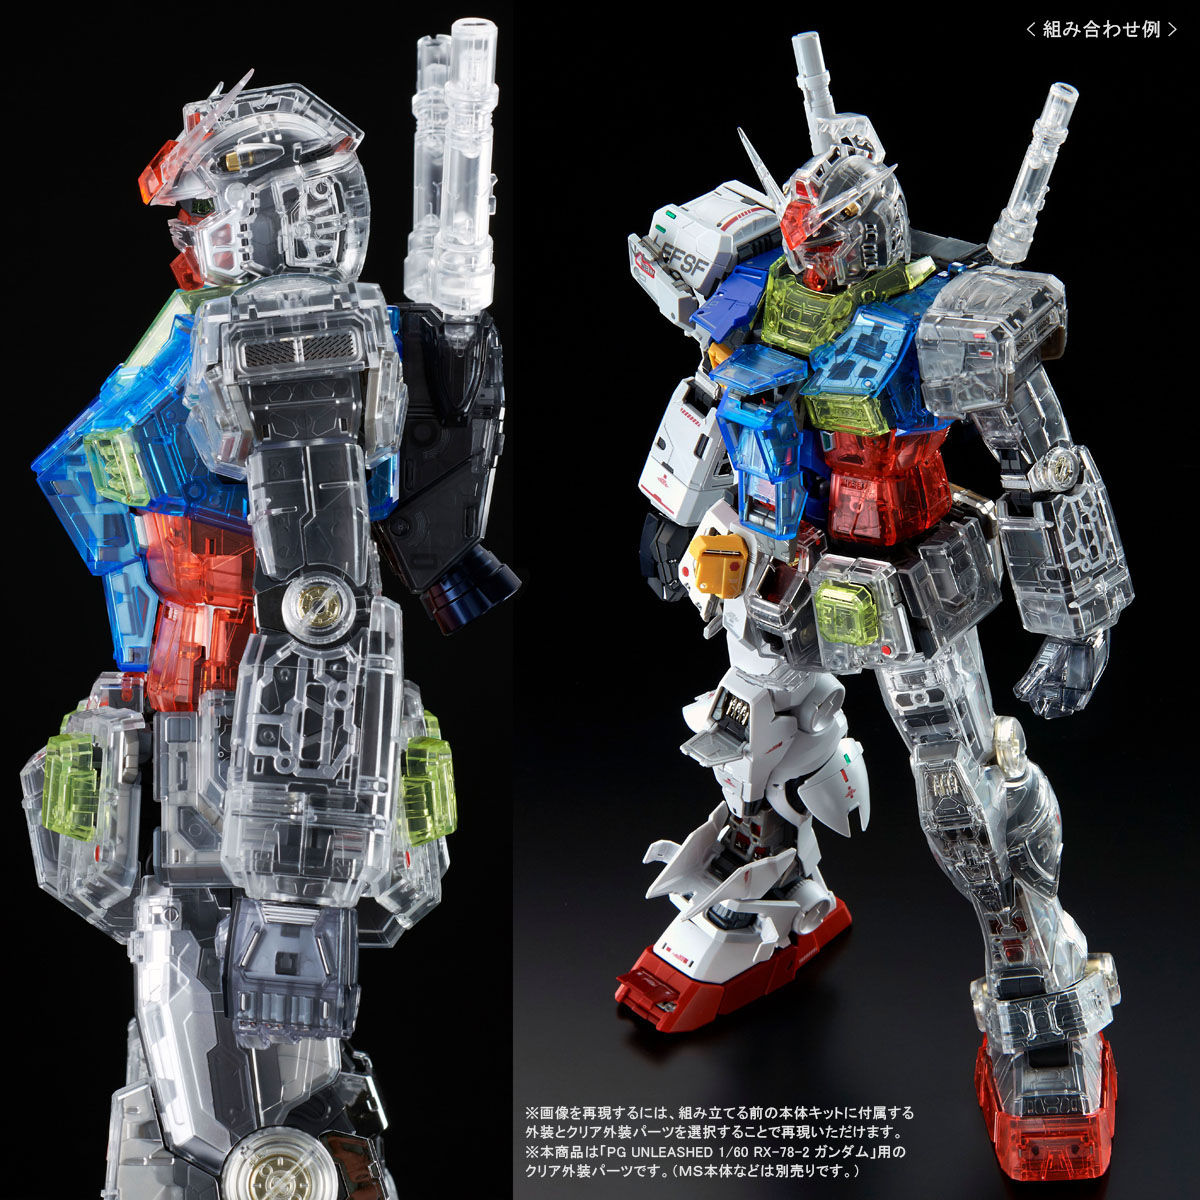 PG Unleashed 1/60 Color Clear Parts For RX-78-2 Gundam